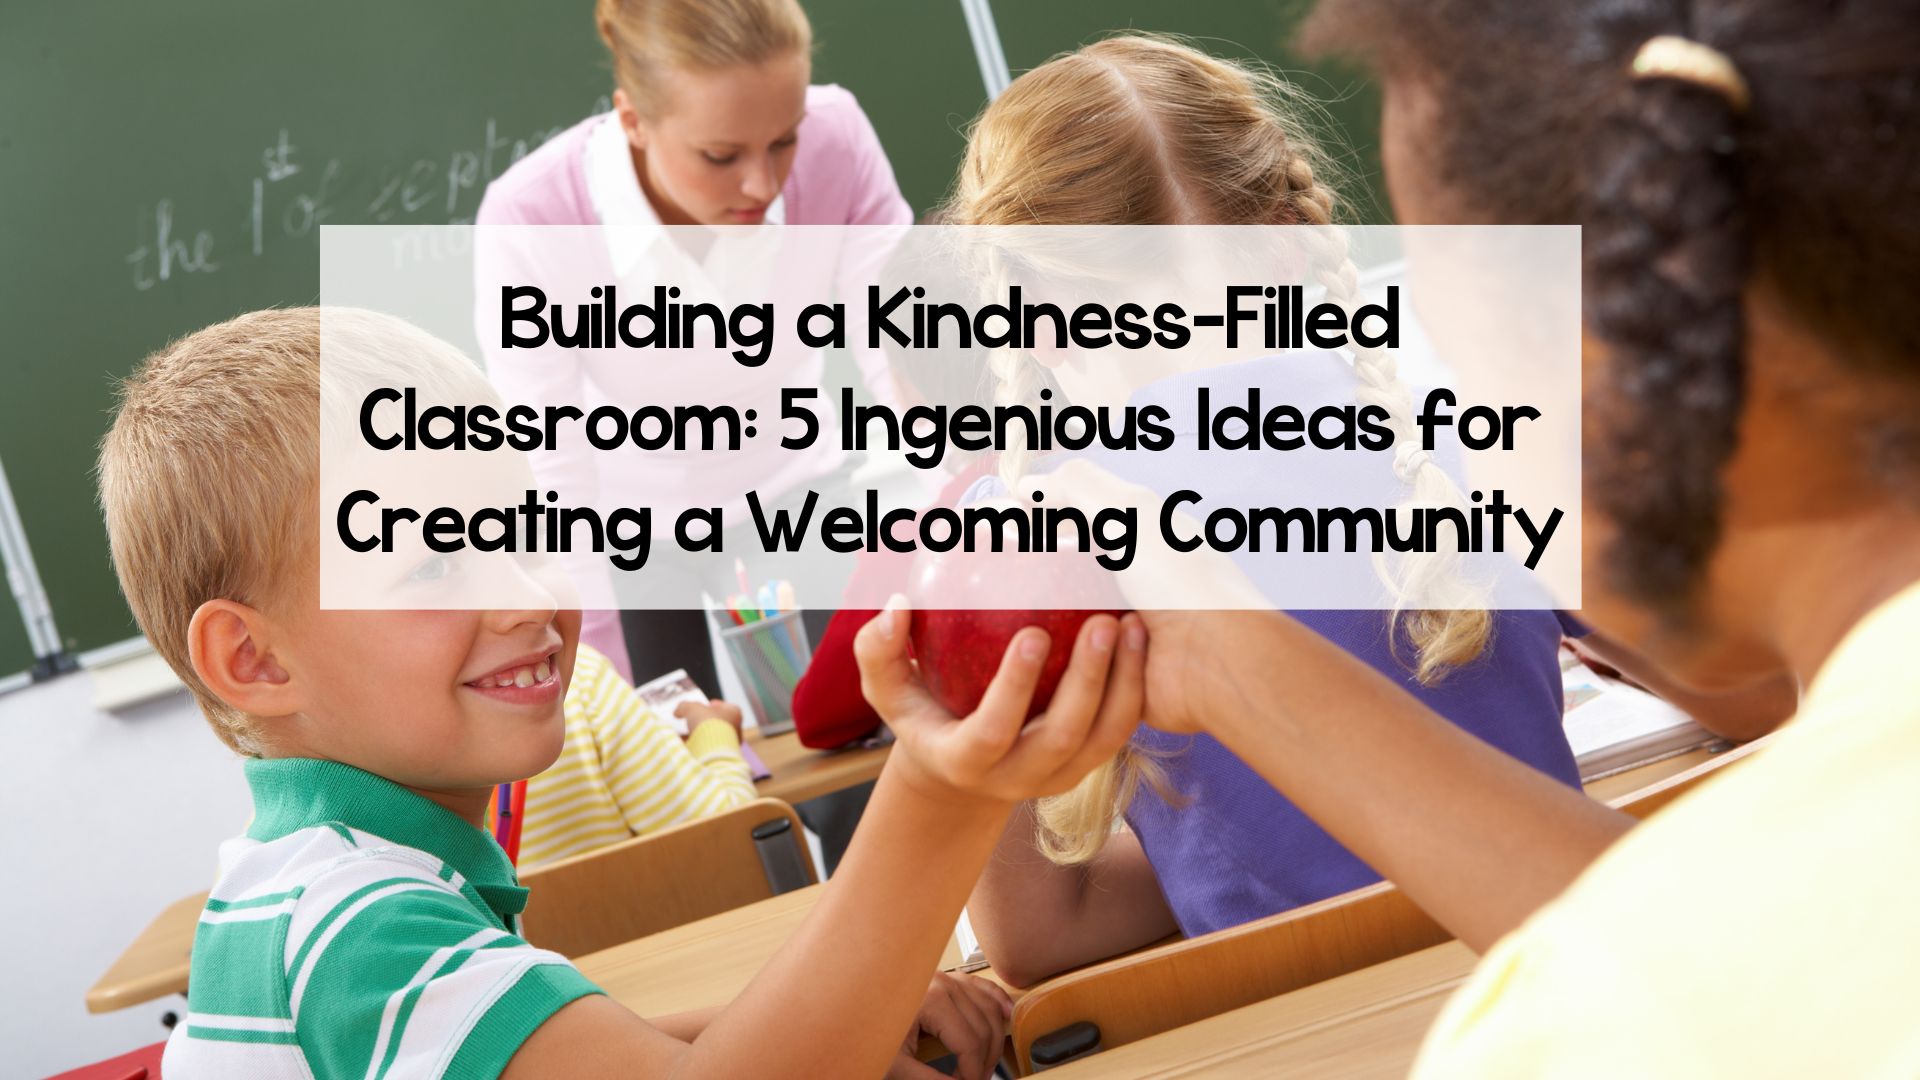 Building a Kindness-Filled Classroom: 5 Ingenious Ideas for Creating a Welcoming Community